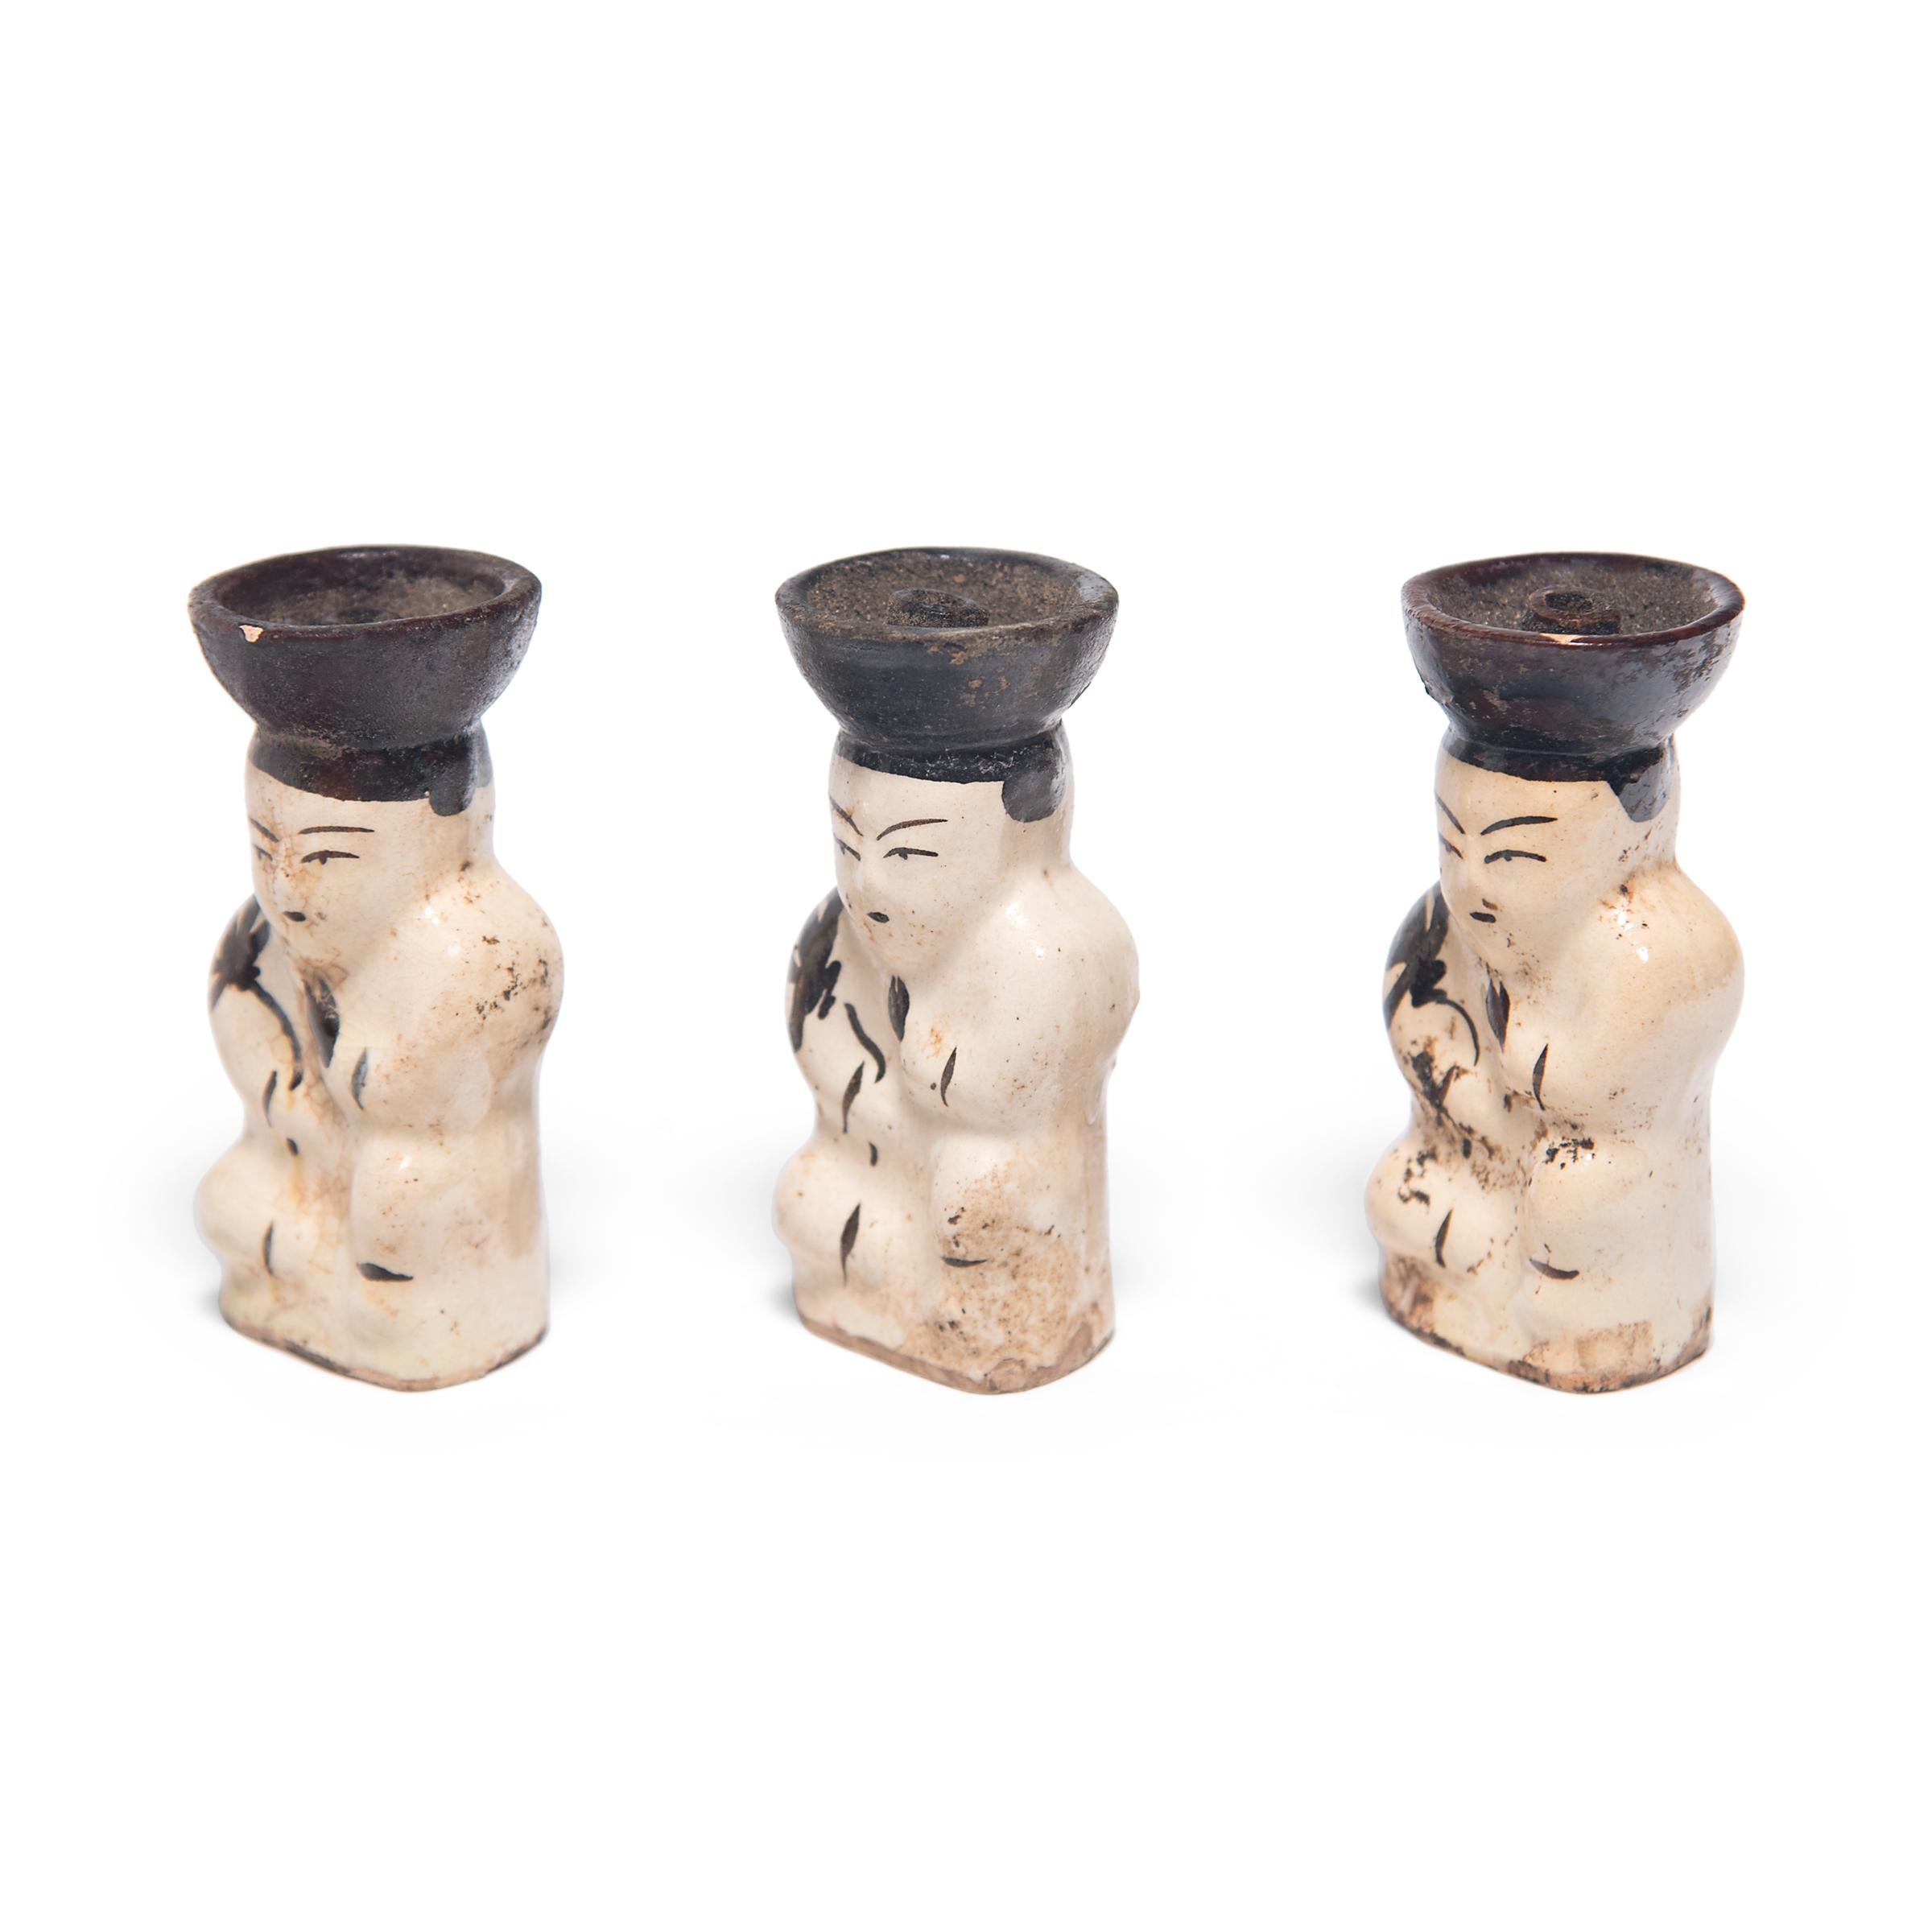 Each of these early 20th century ceramic oil lamps is formed in the shape of a young boy, a motif often referred to as a 